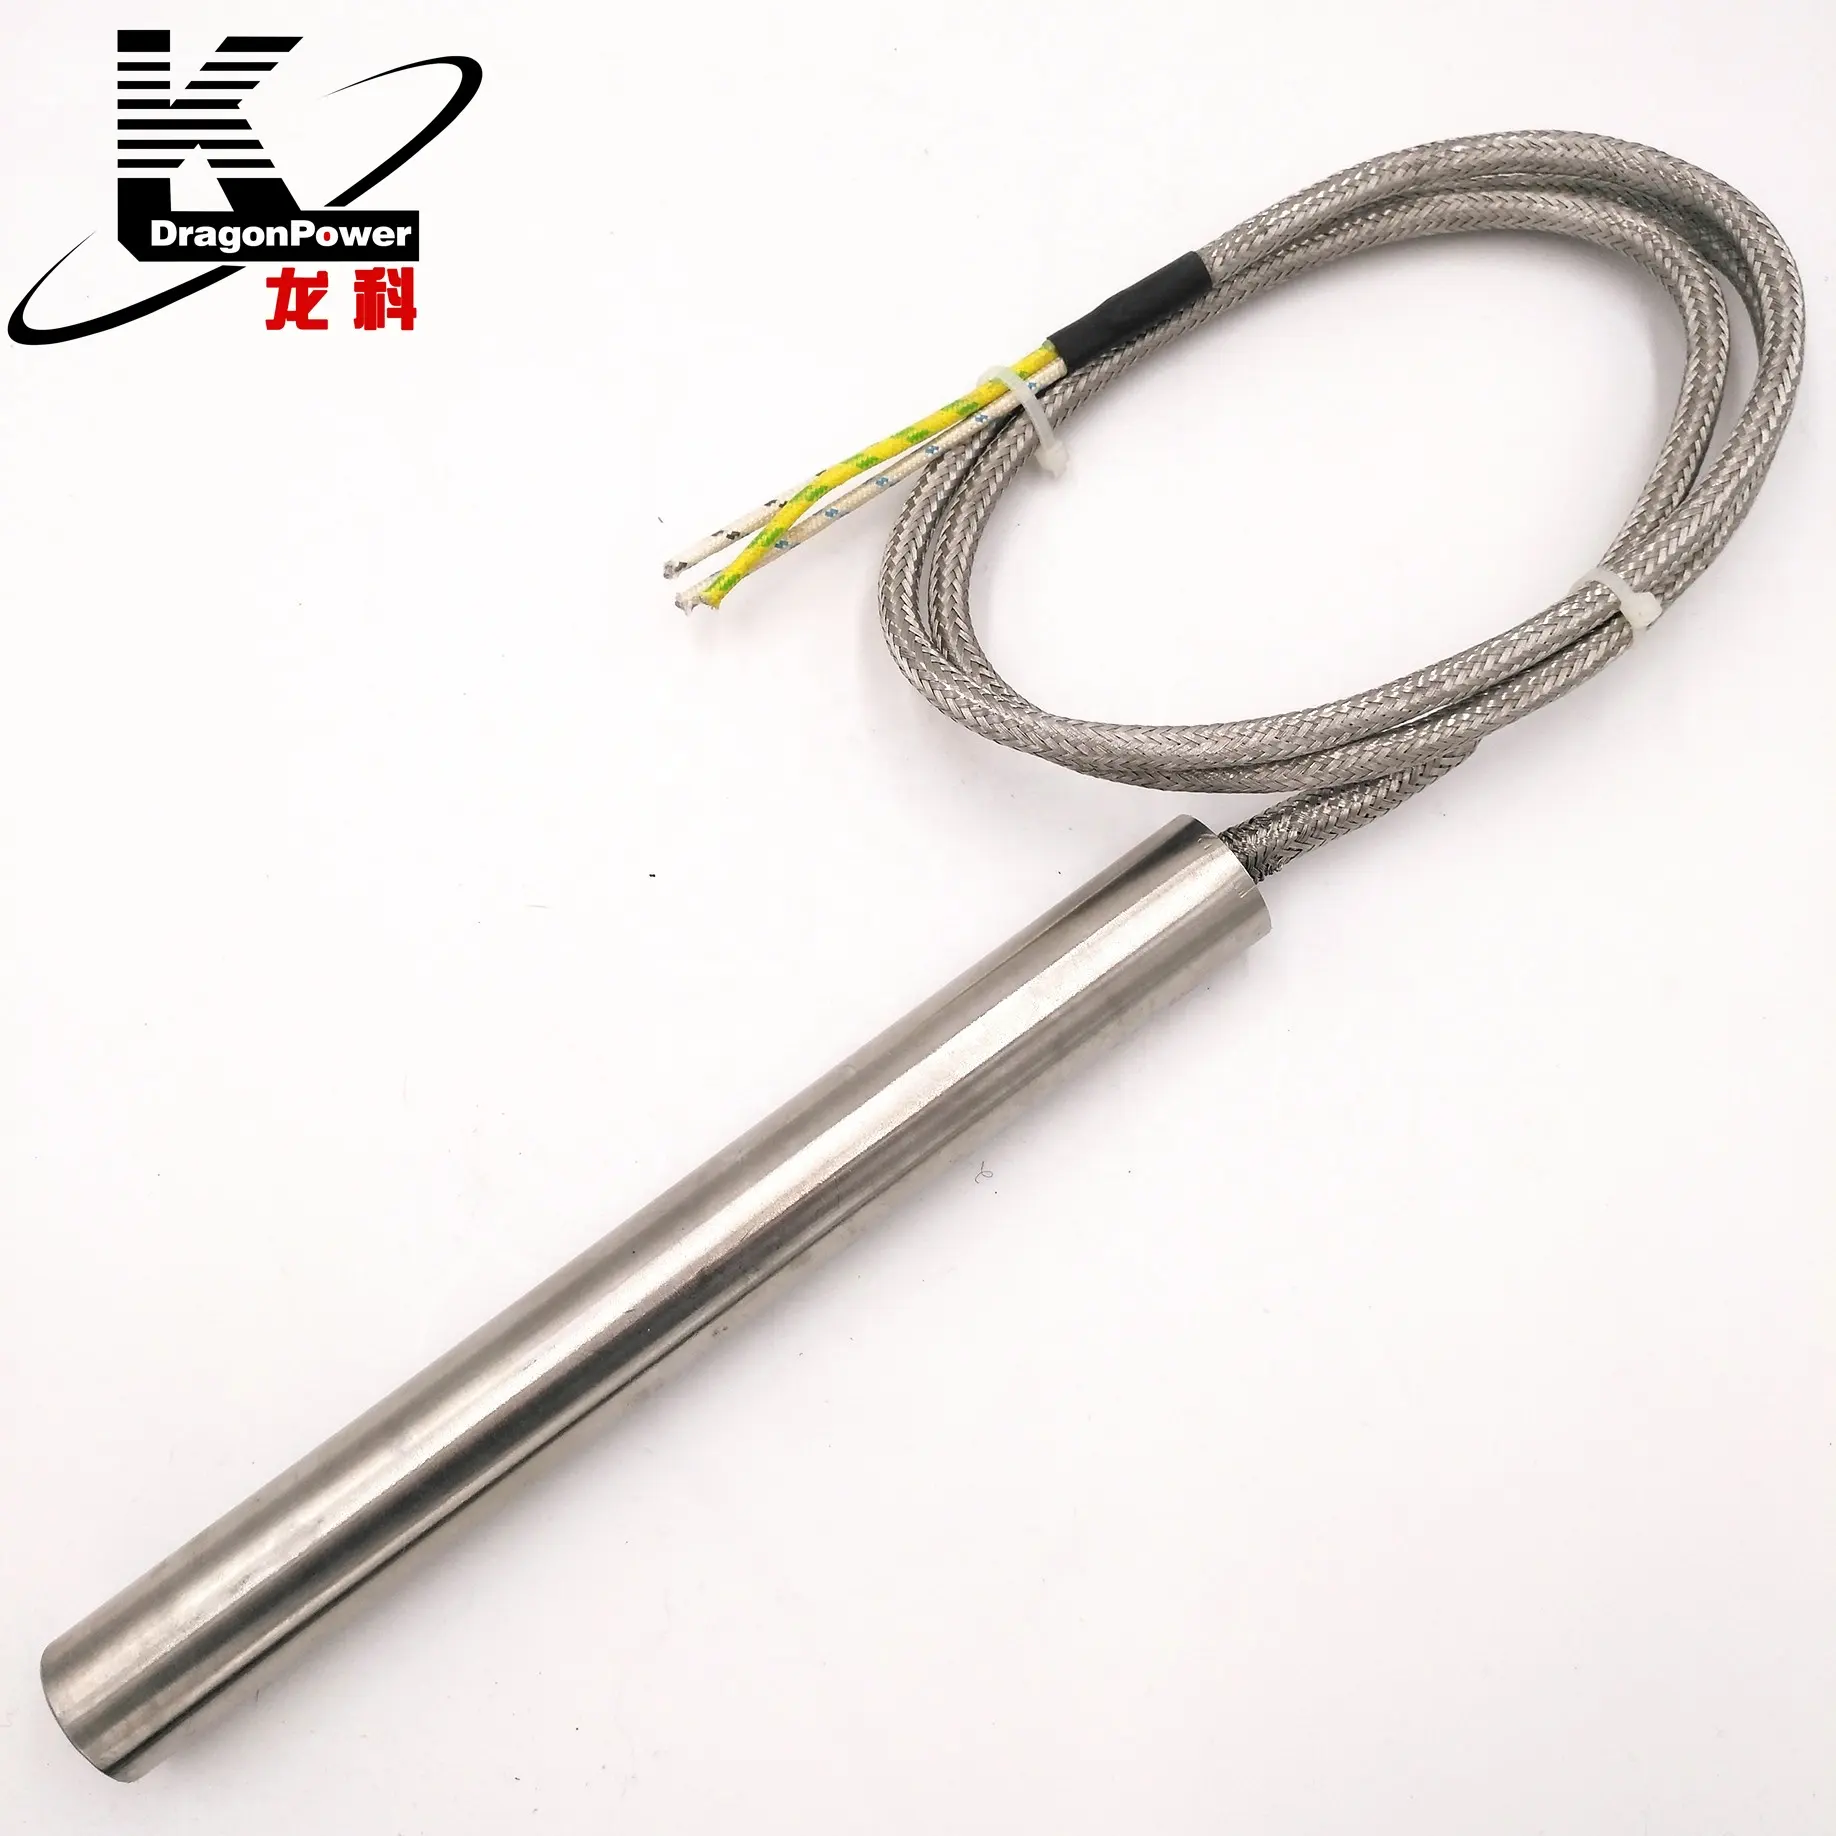 Cartridge Heater Heating Rod With Fiber Glass Wire Or Pure Nickle Wire Electric Heater